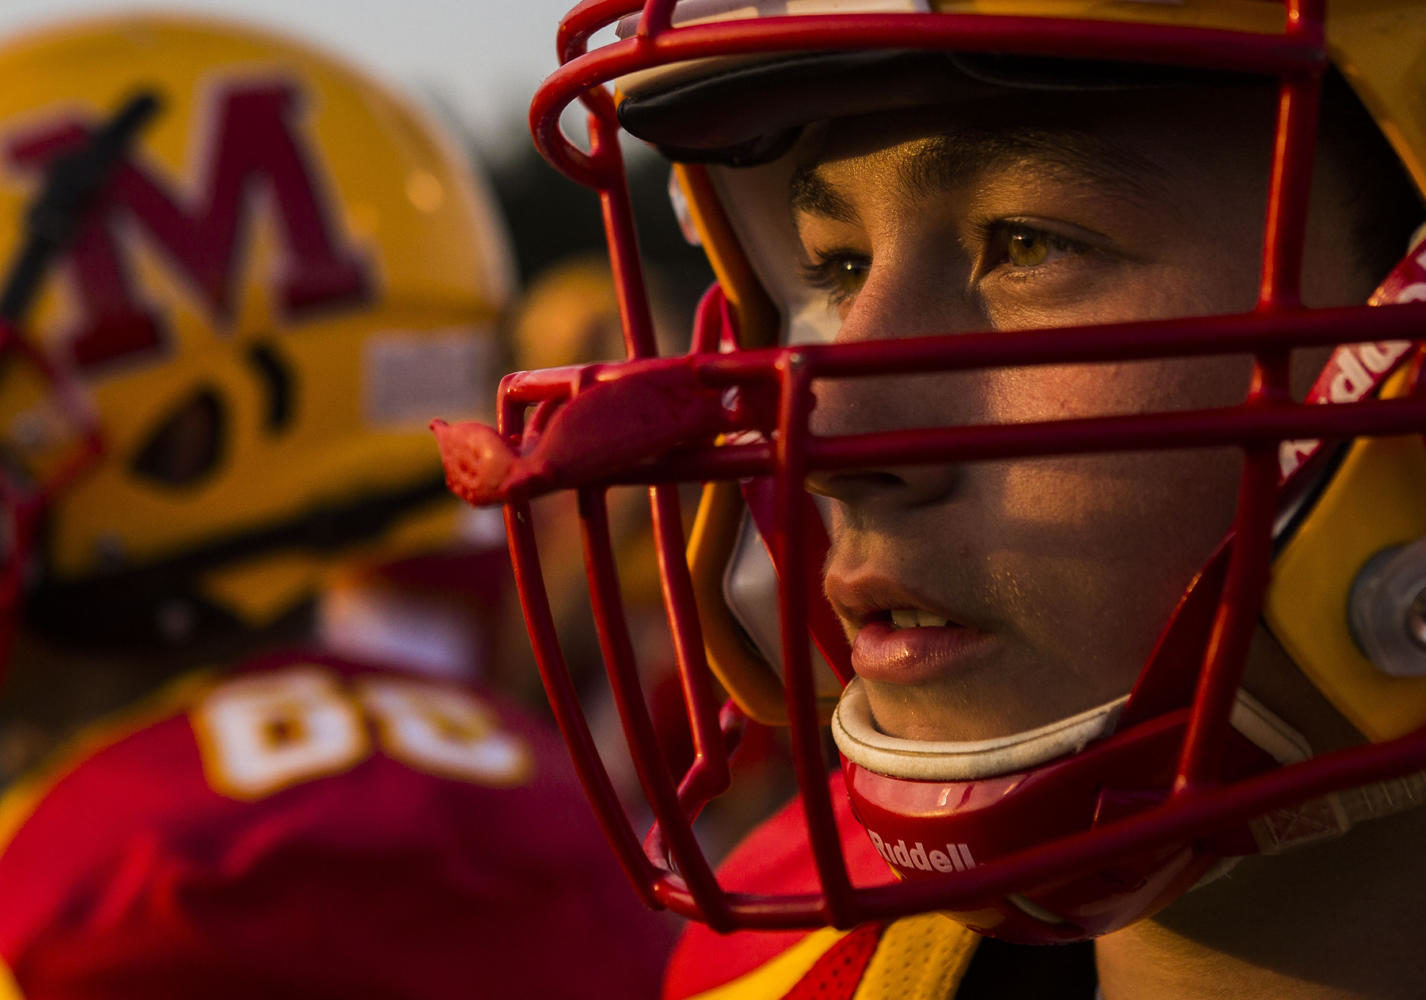 Murphysboro linebacker Michael Shearer looks onto the field during the 100th meeting between the Murphysboro Red Devils and the Carbondale Terriers on Friday, Aug. 25, 2017, at Doc Bencini Field, in Murphysboro, Illinois. (Ryan Michalesko | @photosbylesko)